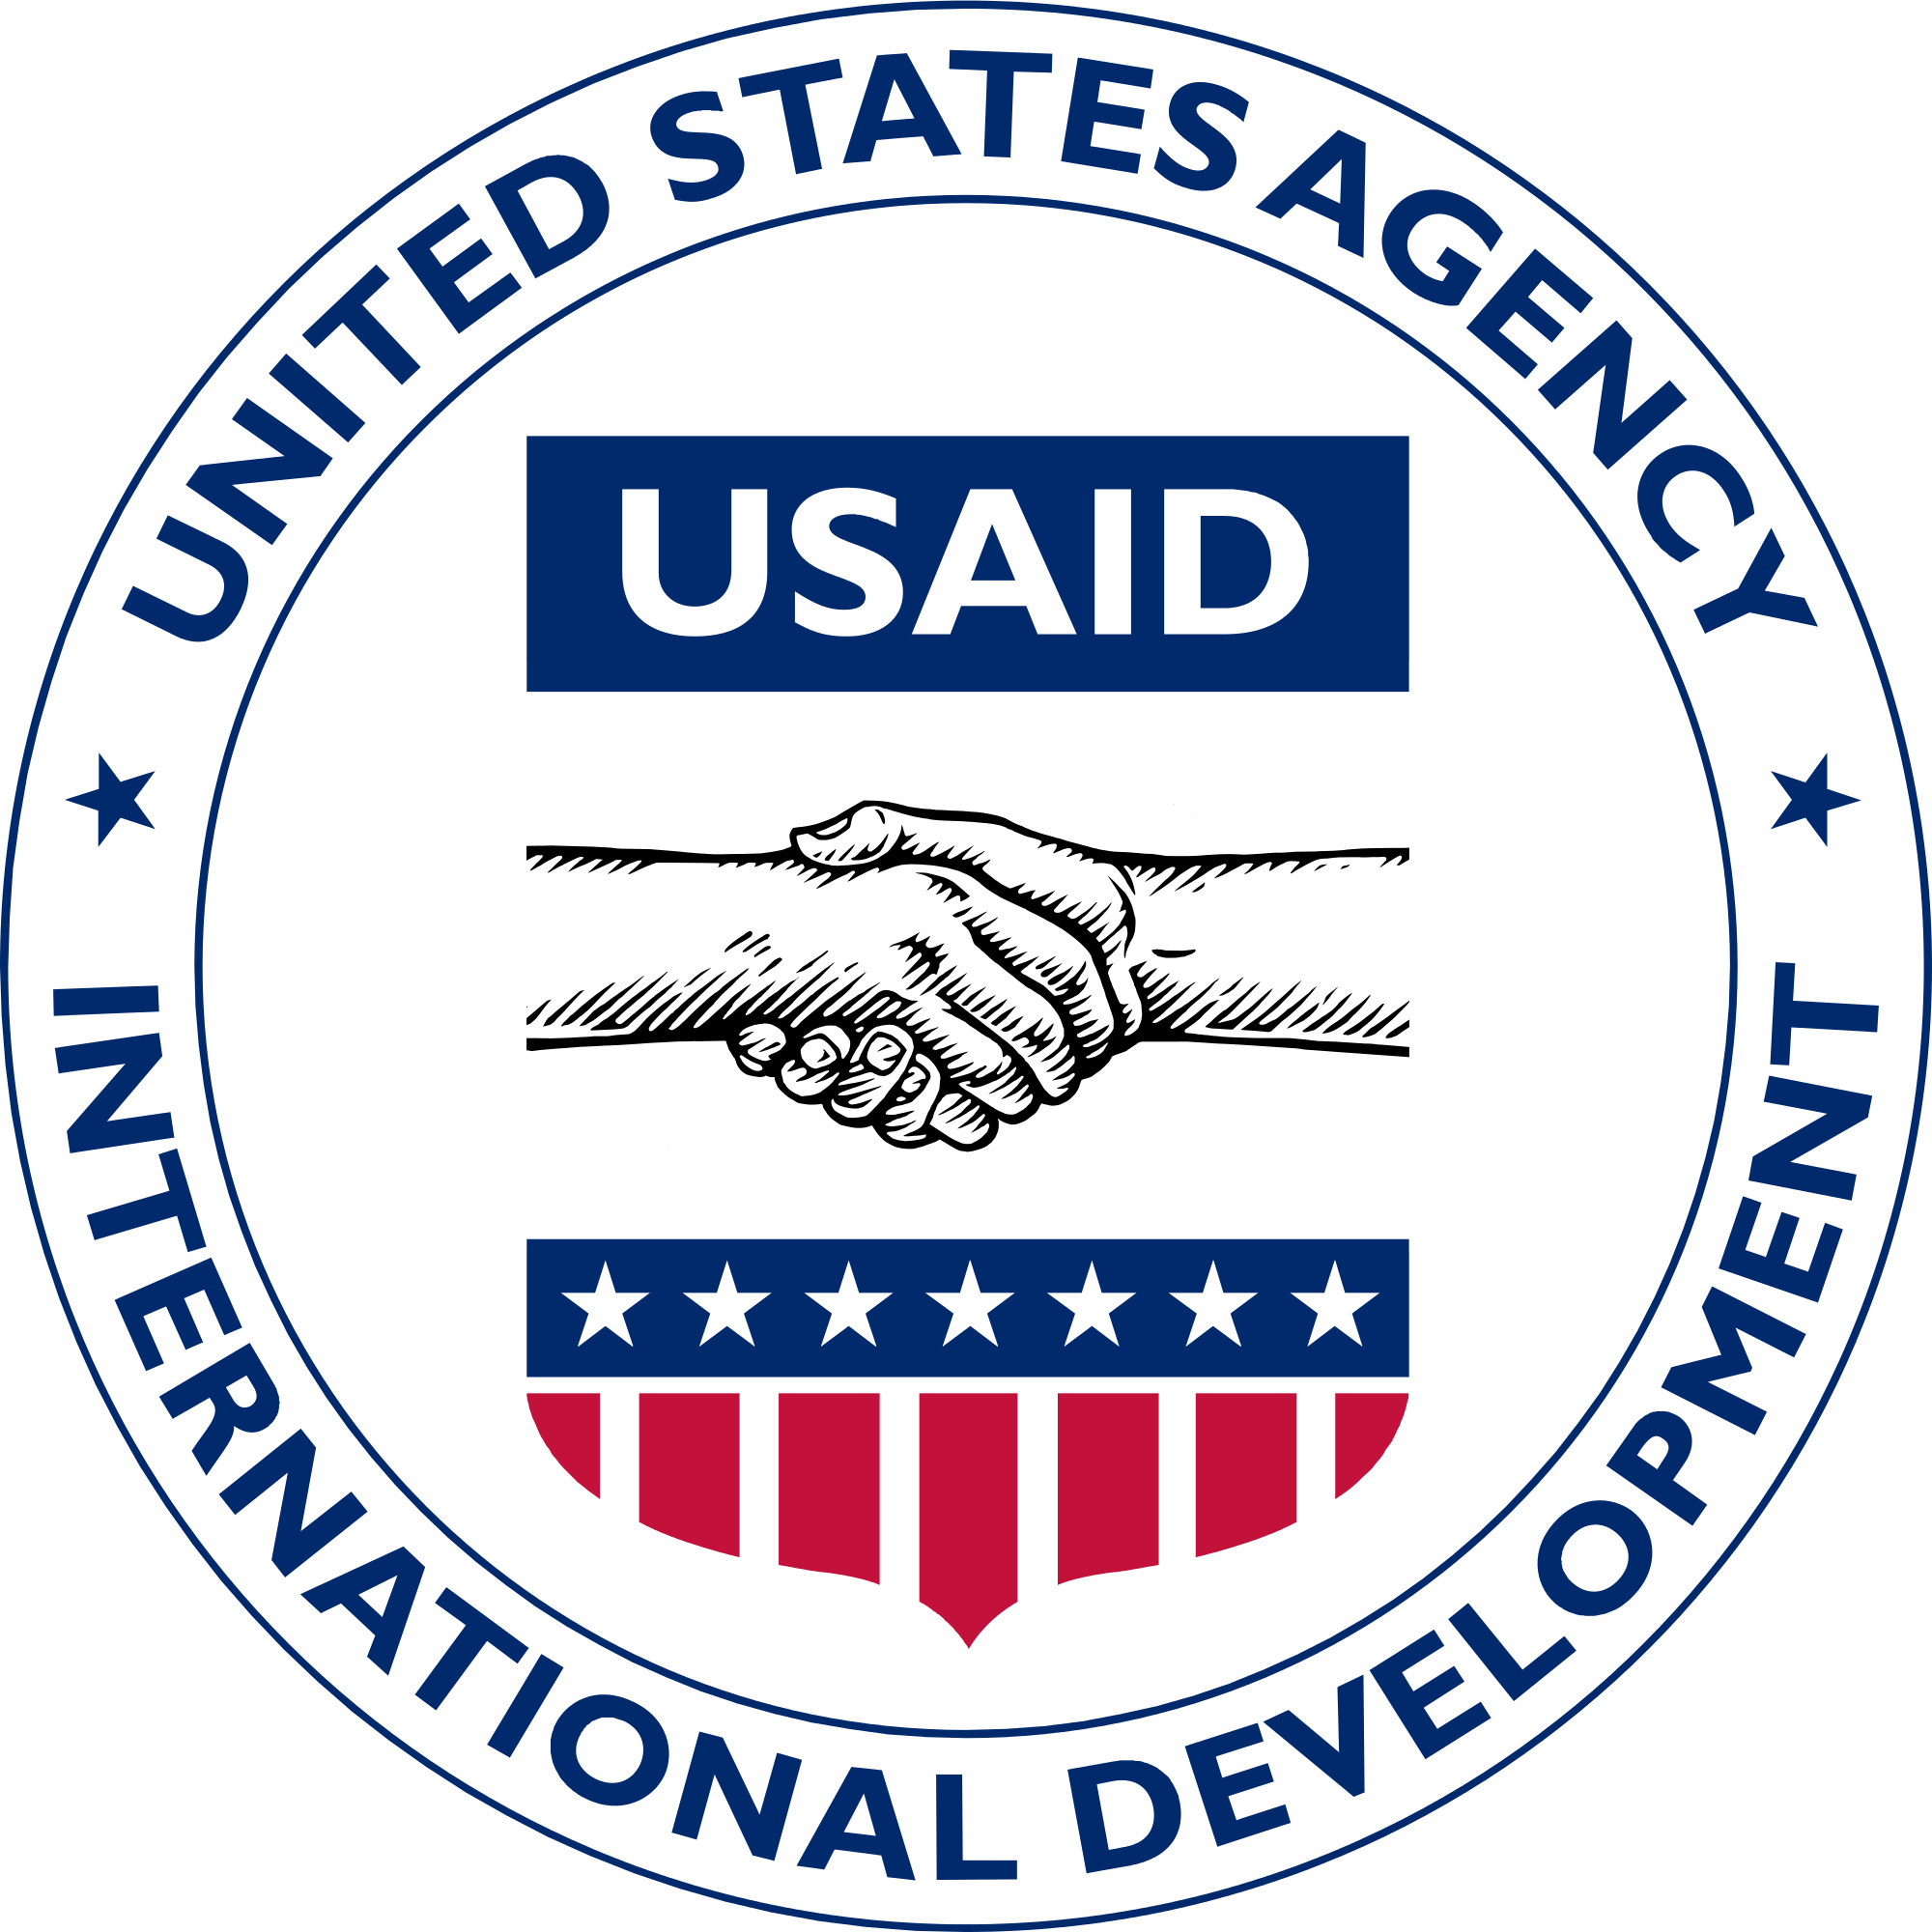 State of the United States Logo - Department of State and USAID | Performance.gov